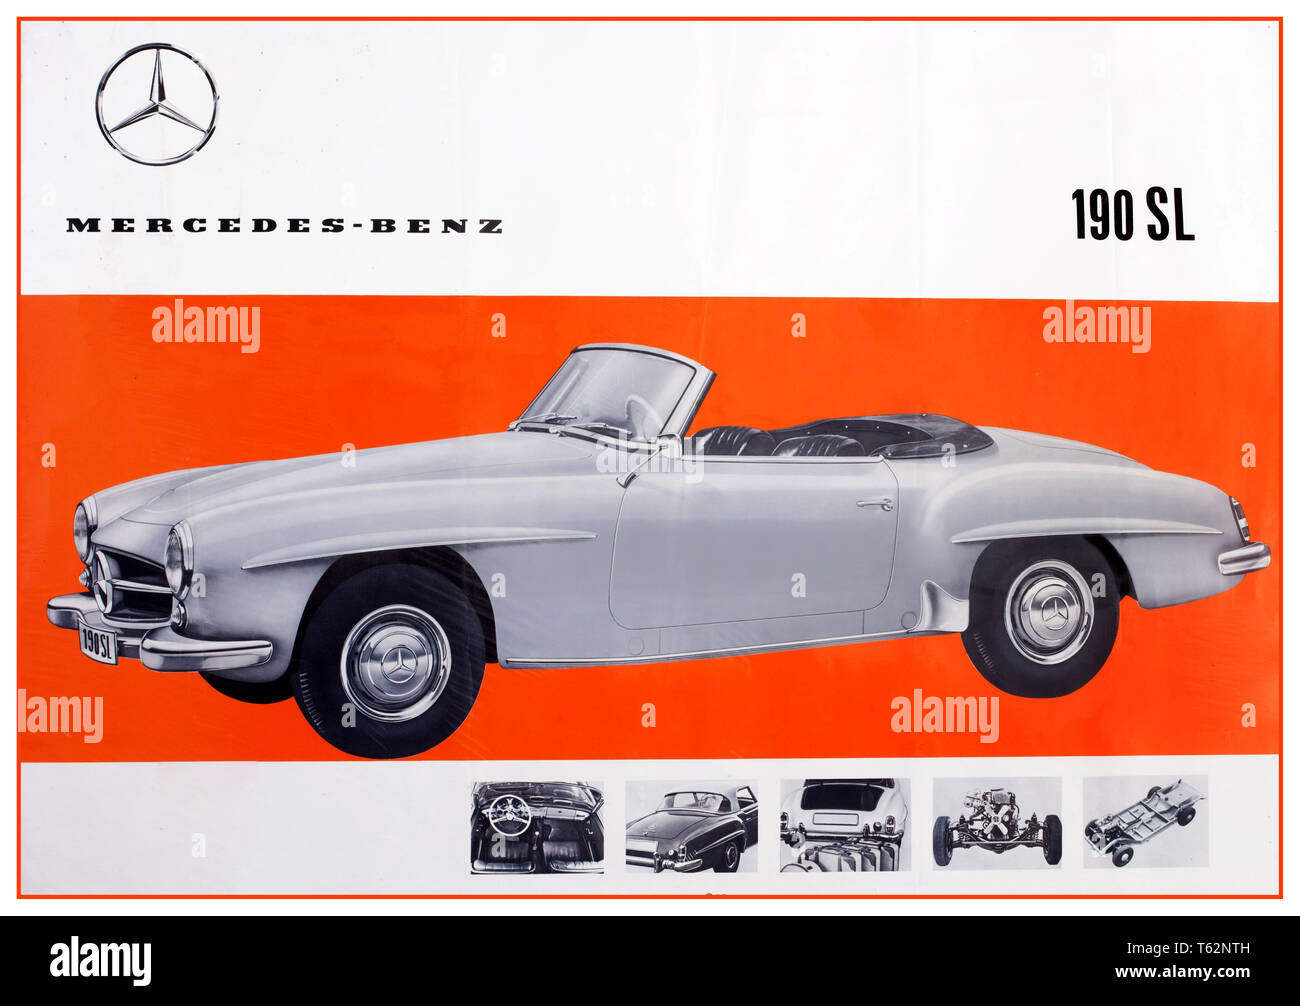 Mercedes-Benz 190 SL 1950's sales brochure for The Mercedes-Benz 190 SL (W121)  a two-door luxury roadster produced by Mercedes-Benz between May 1955 and February 1963. Internally referred to as W121 (BII or B2), it was first shown in prototype at the 1954 New York Auto Show, and was available with an optional removable hardtop. The 190 SL presented an attractive, more affordable alternative to the exclusive Mercedes-Benz 300 SL Stock Photo